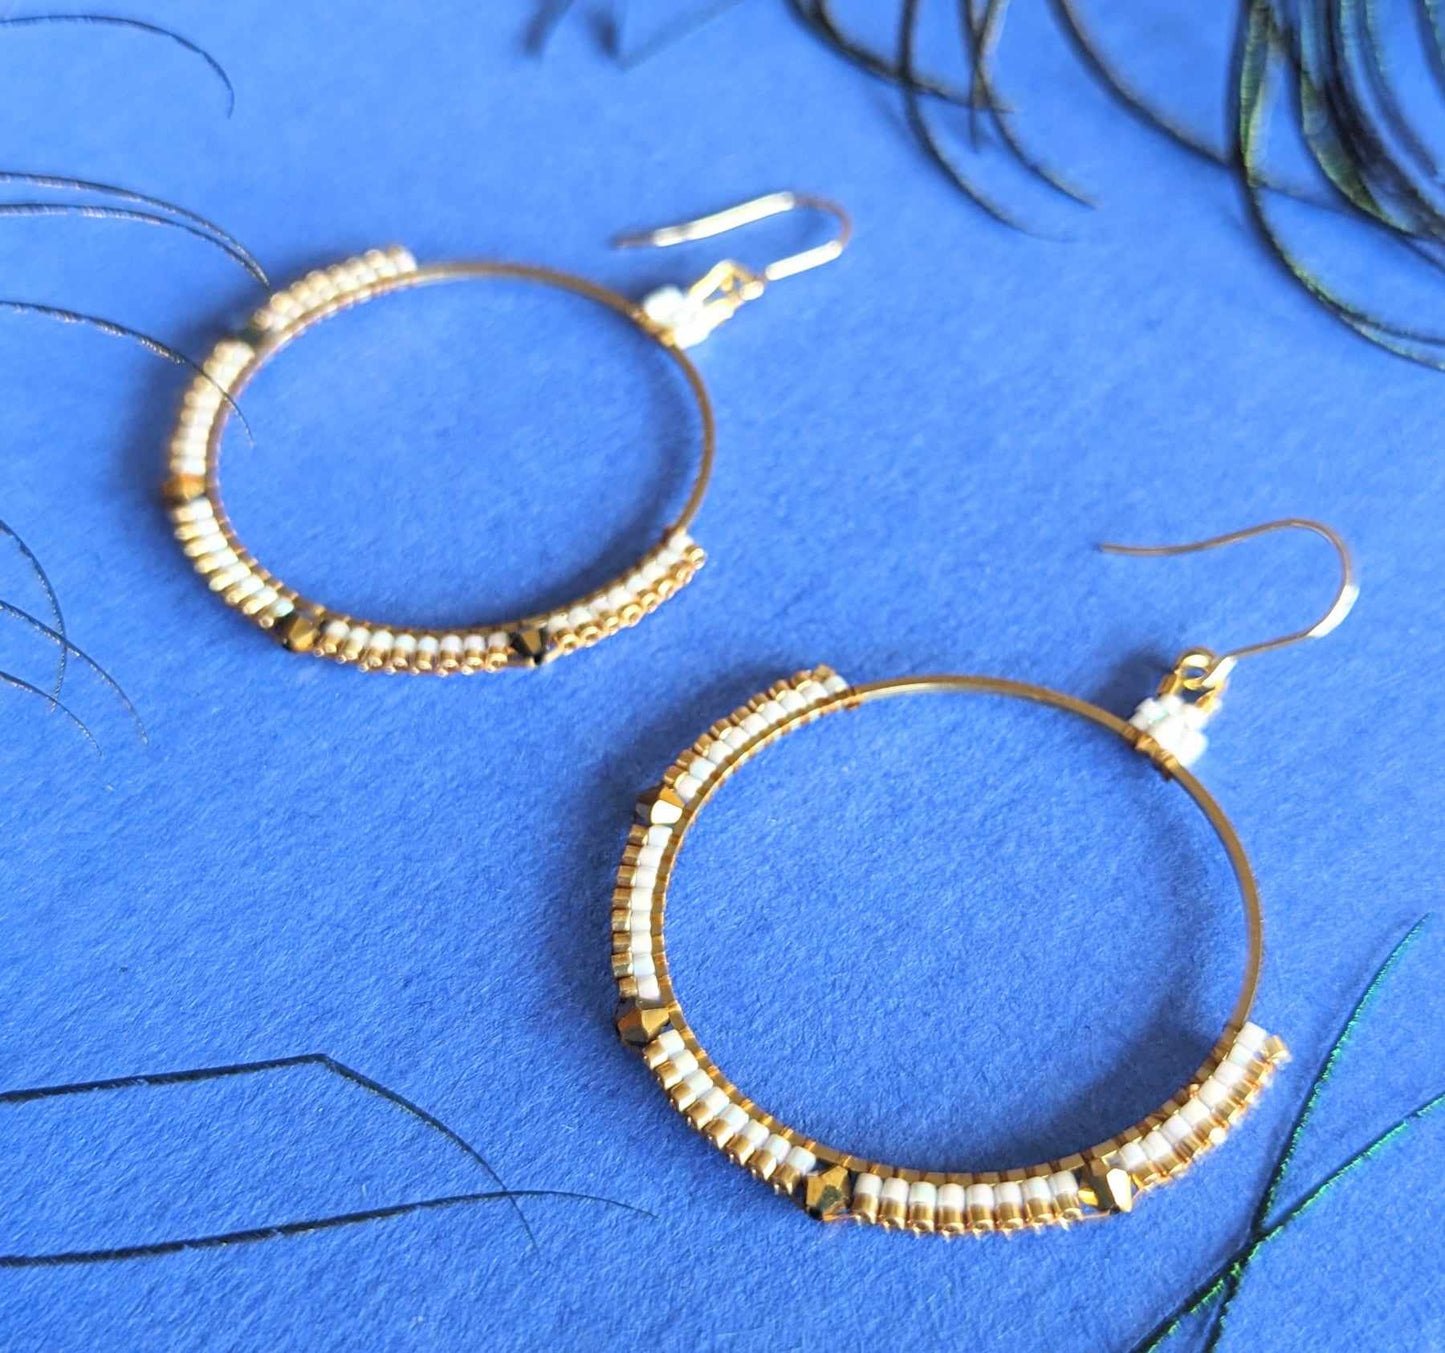 White and Gold Hoop Earrings